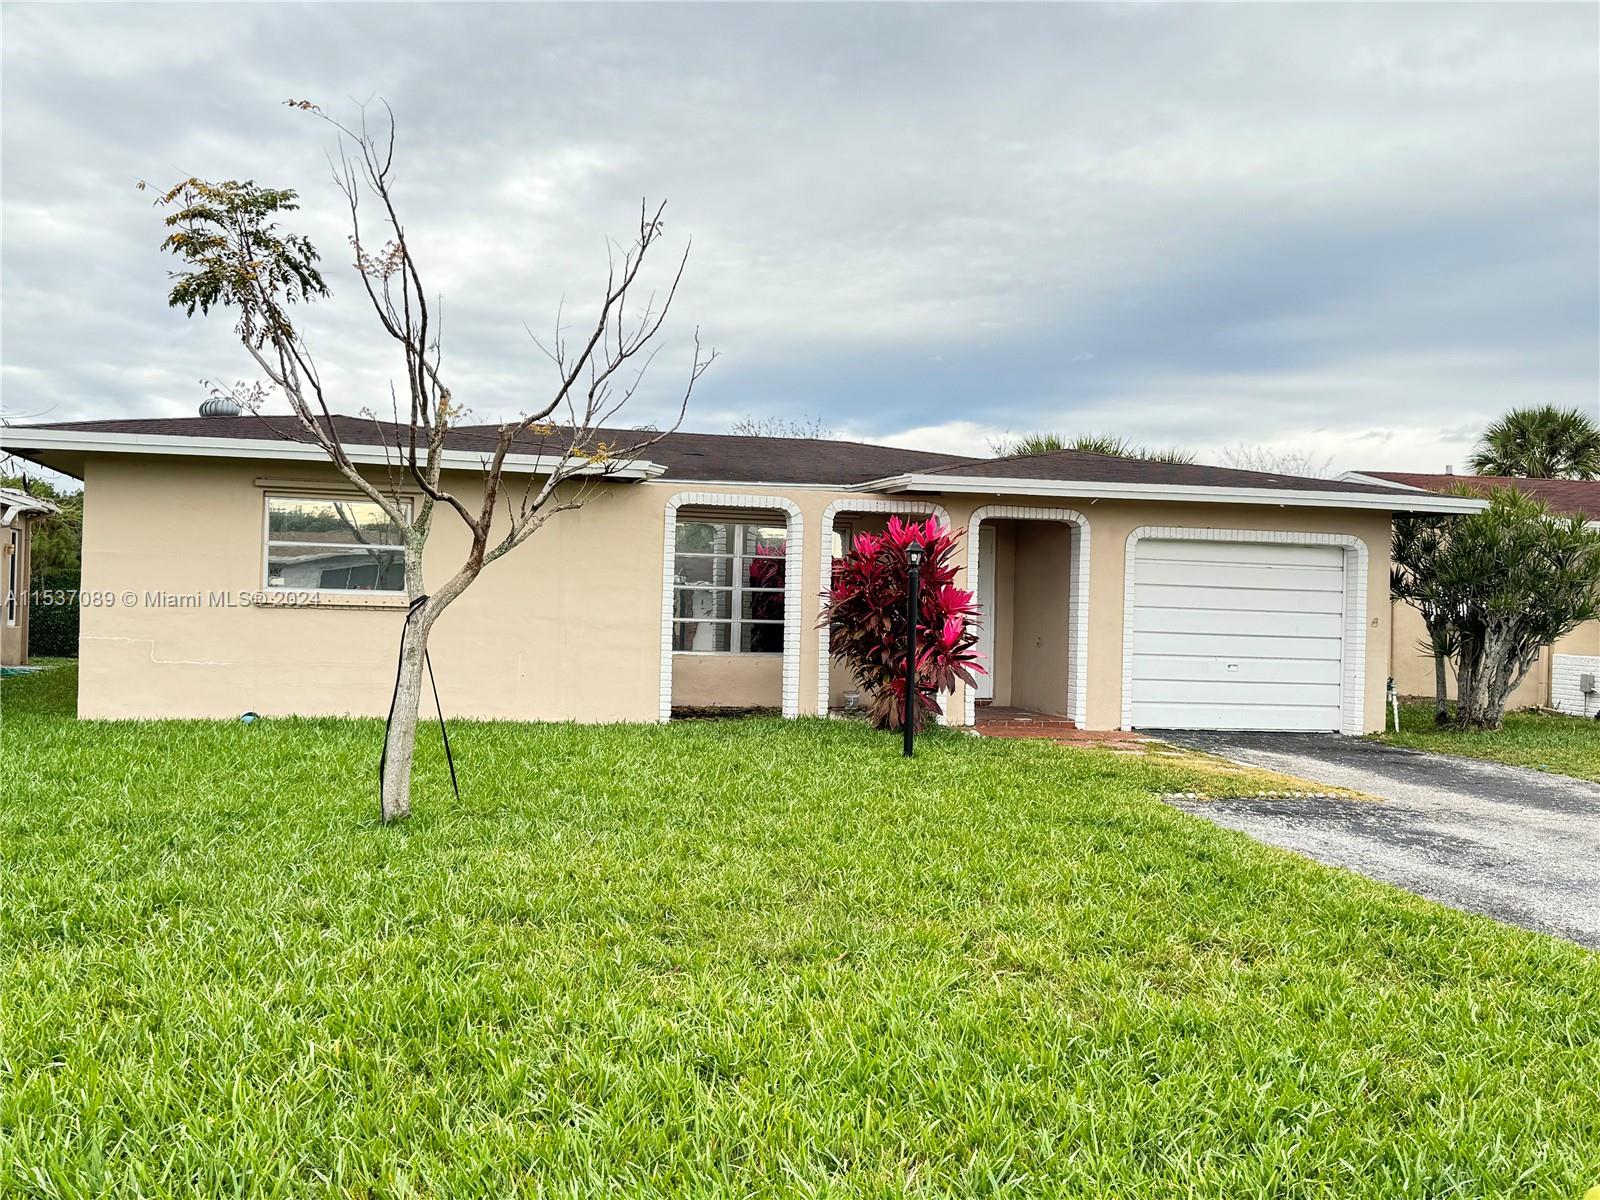 4731 NW 13th Ave, Deerfield Beach, Florida 33064, 2 Bedrooms Bedrooms, ,2 BathroomsBathrooms,Residentiallease,For Rent,4731 NW 13th Ave,A11537089